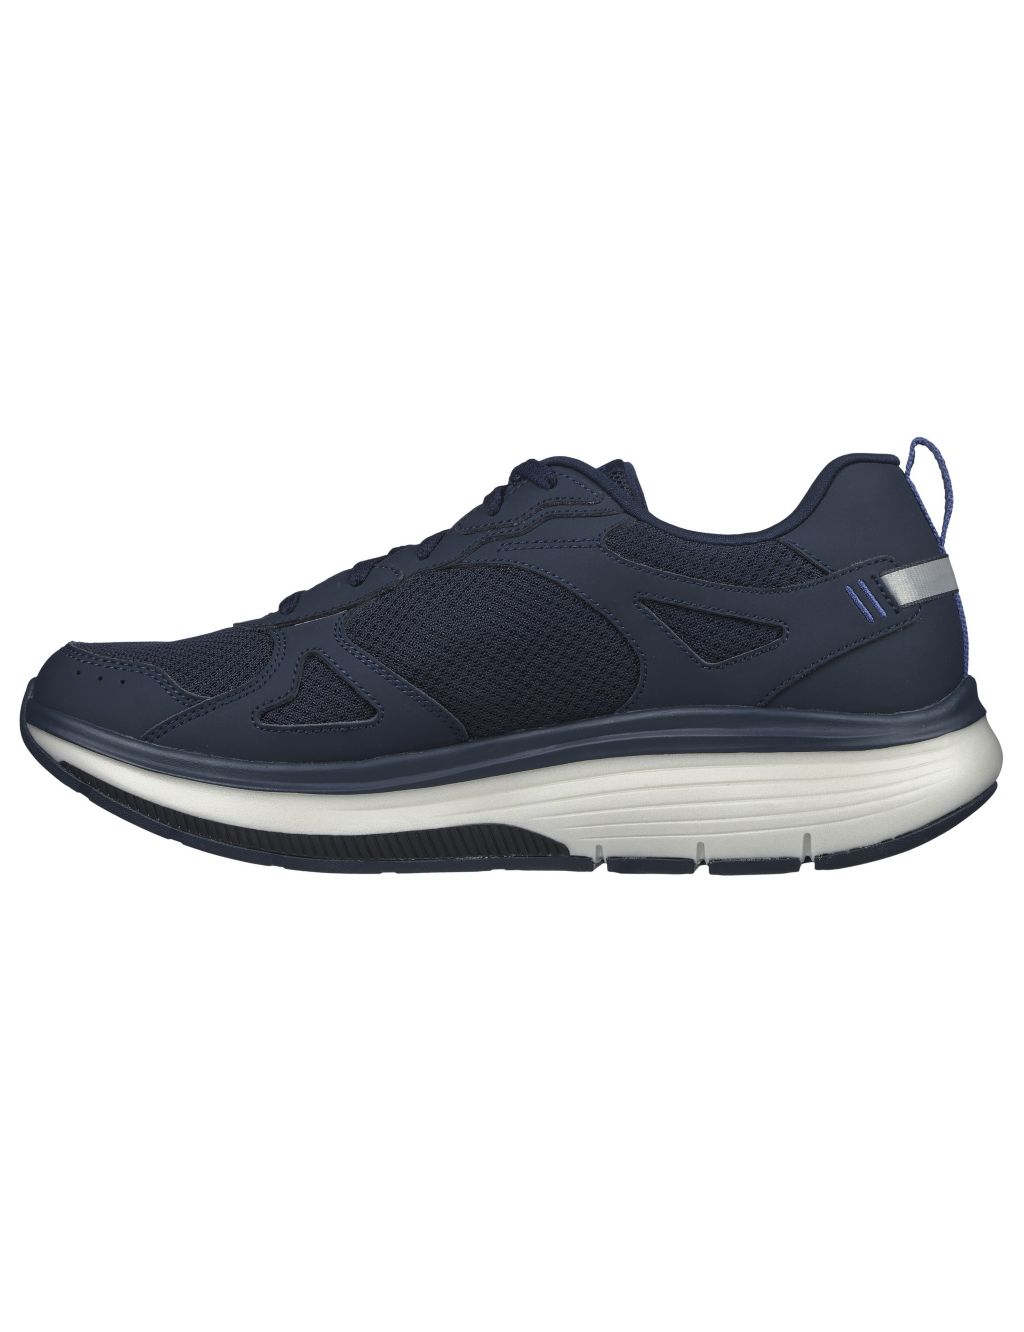 GOwalk Workout Walker Leather Trainers image 5